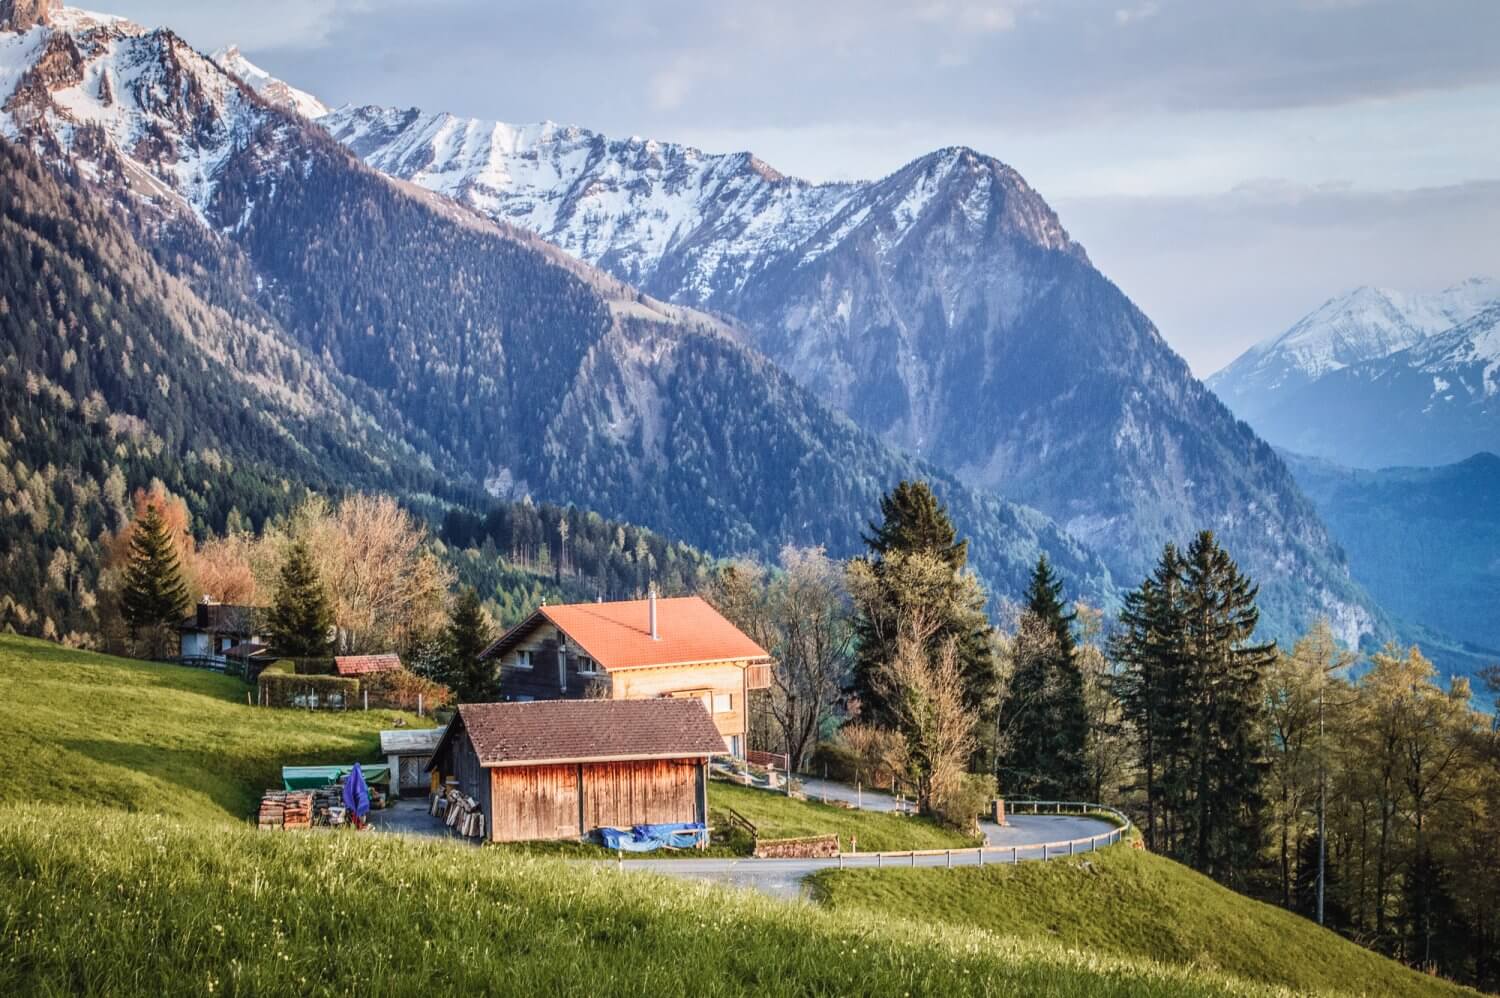 Wow! Absolutely stunning photos of Liechtenstein to ignite your wanderlust. This is one of the smallest countries in the world and one of Europe's most underrated gems. This photo guide to Liechtenstein will explain why. #Liechtenstein #Europe #Travel